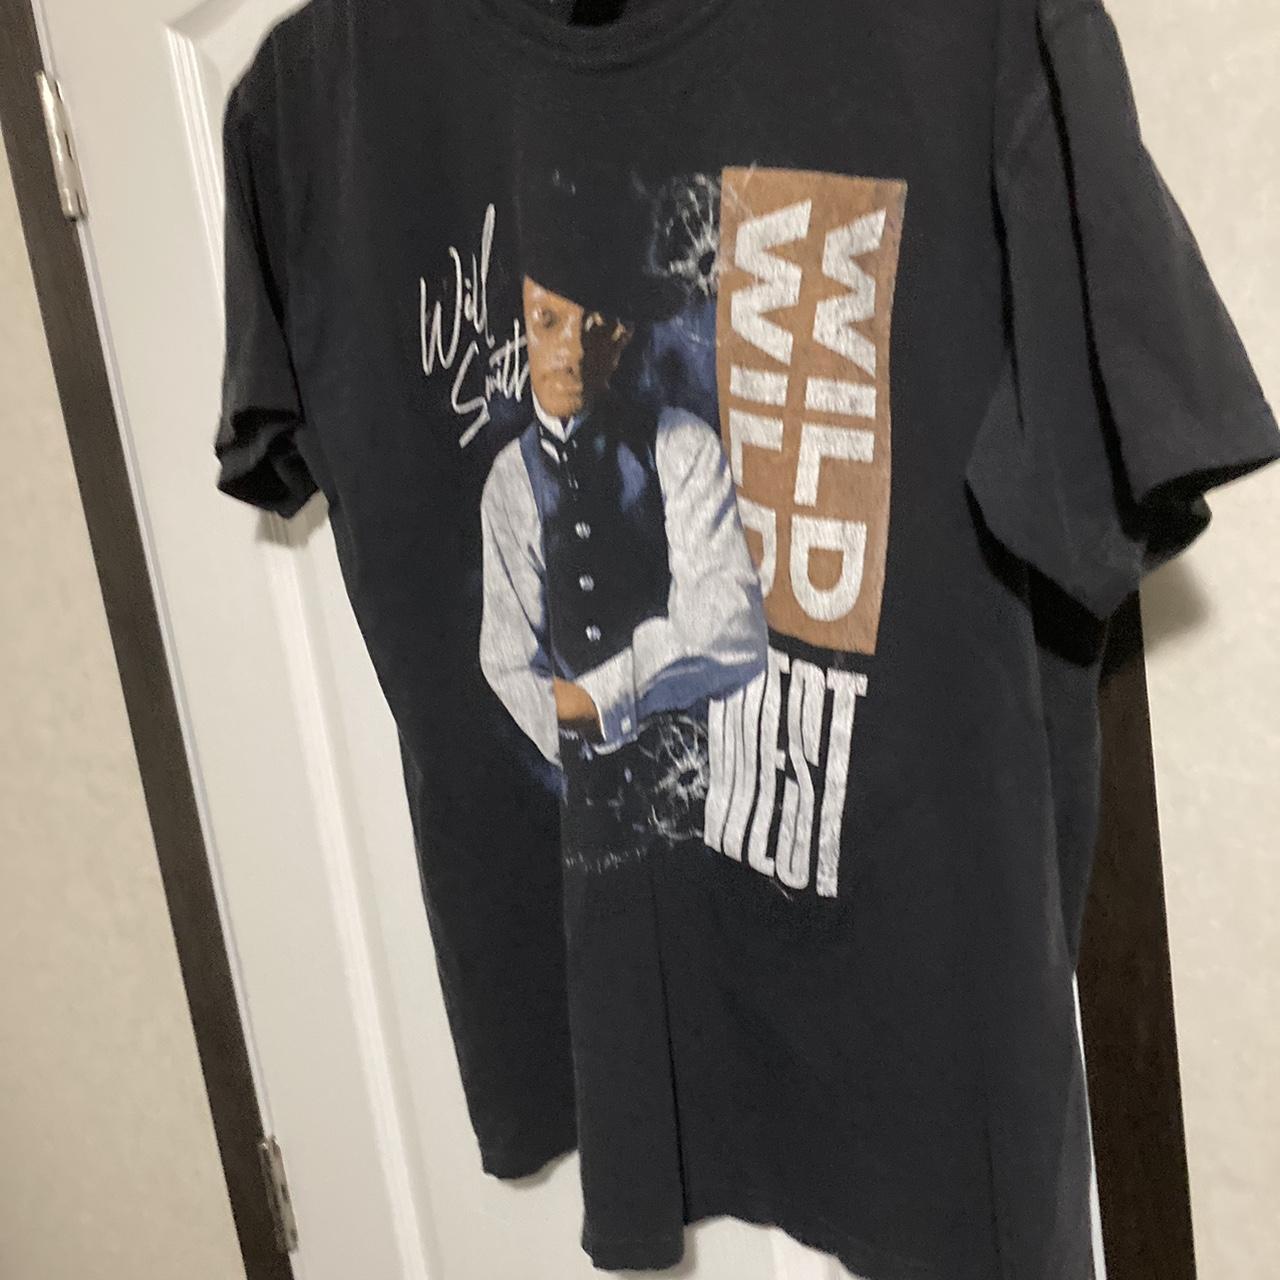 Will smith wild Wild West reprint size large on the... - Depop